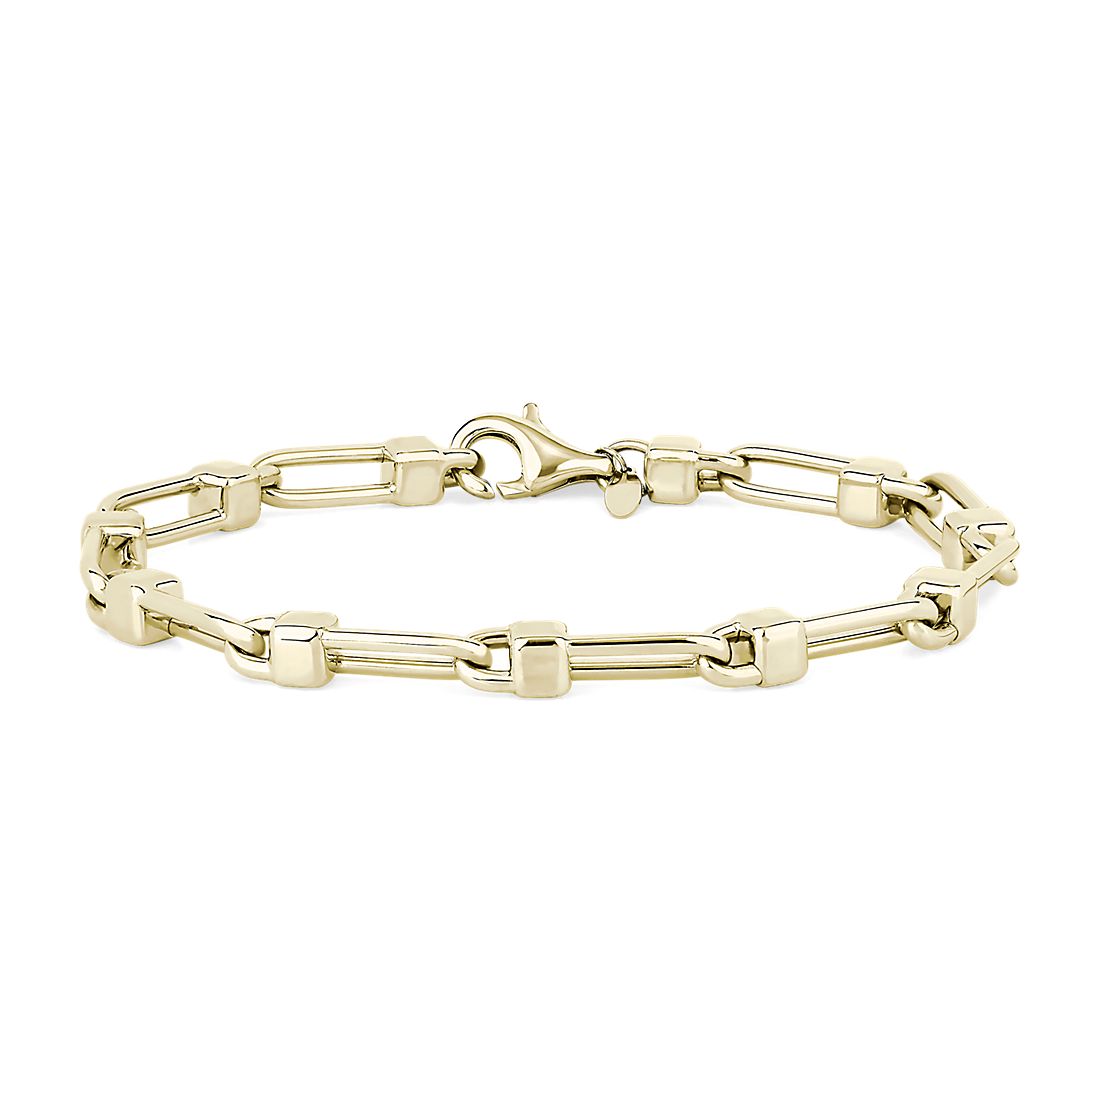 7.5" Mixed Links Bracelet in 14k Yellow Gold (4.9mm)